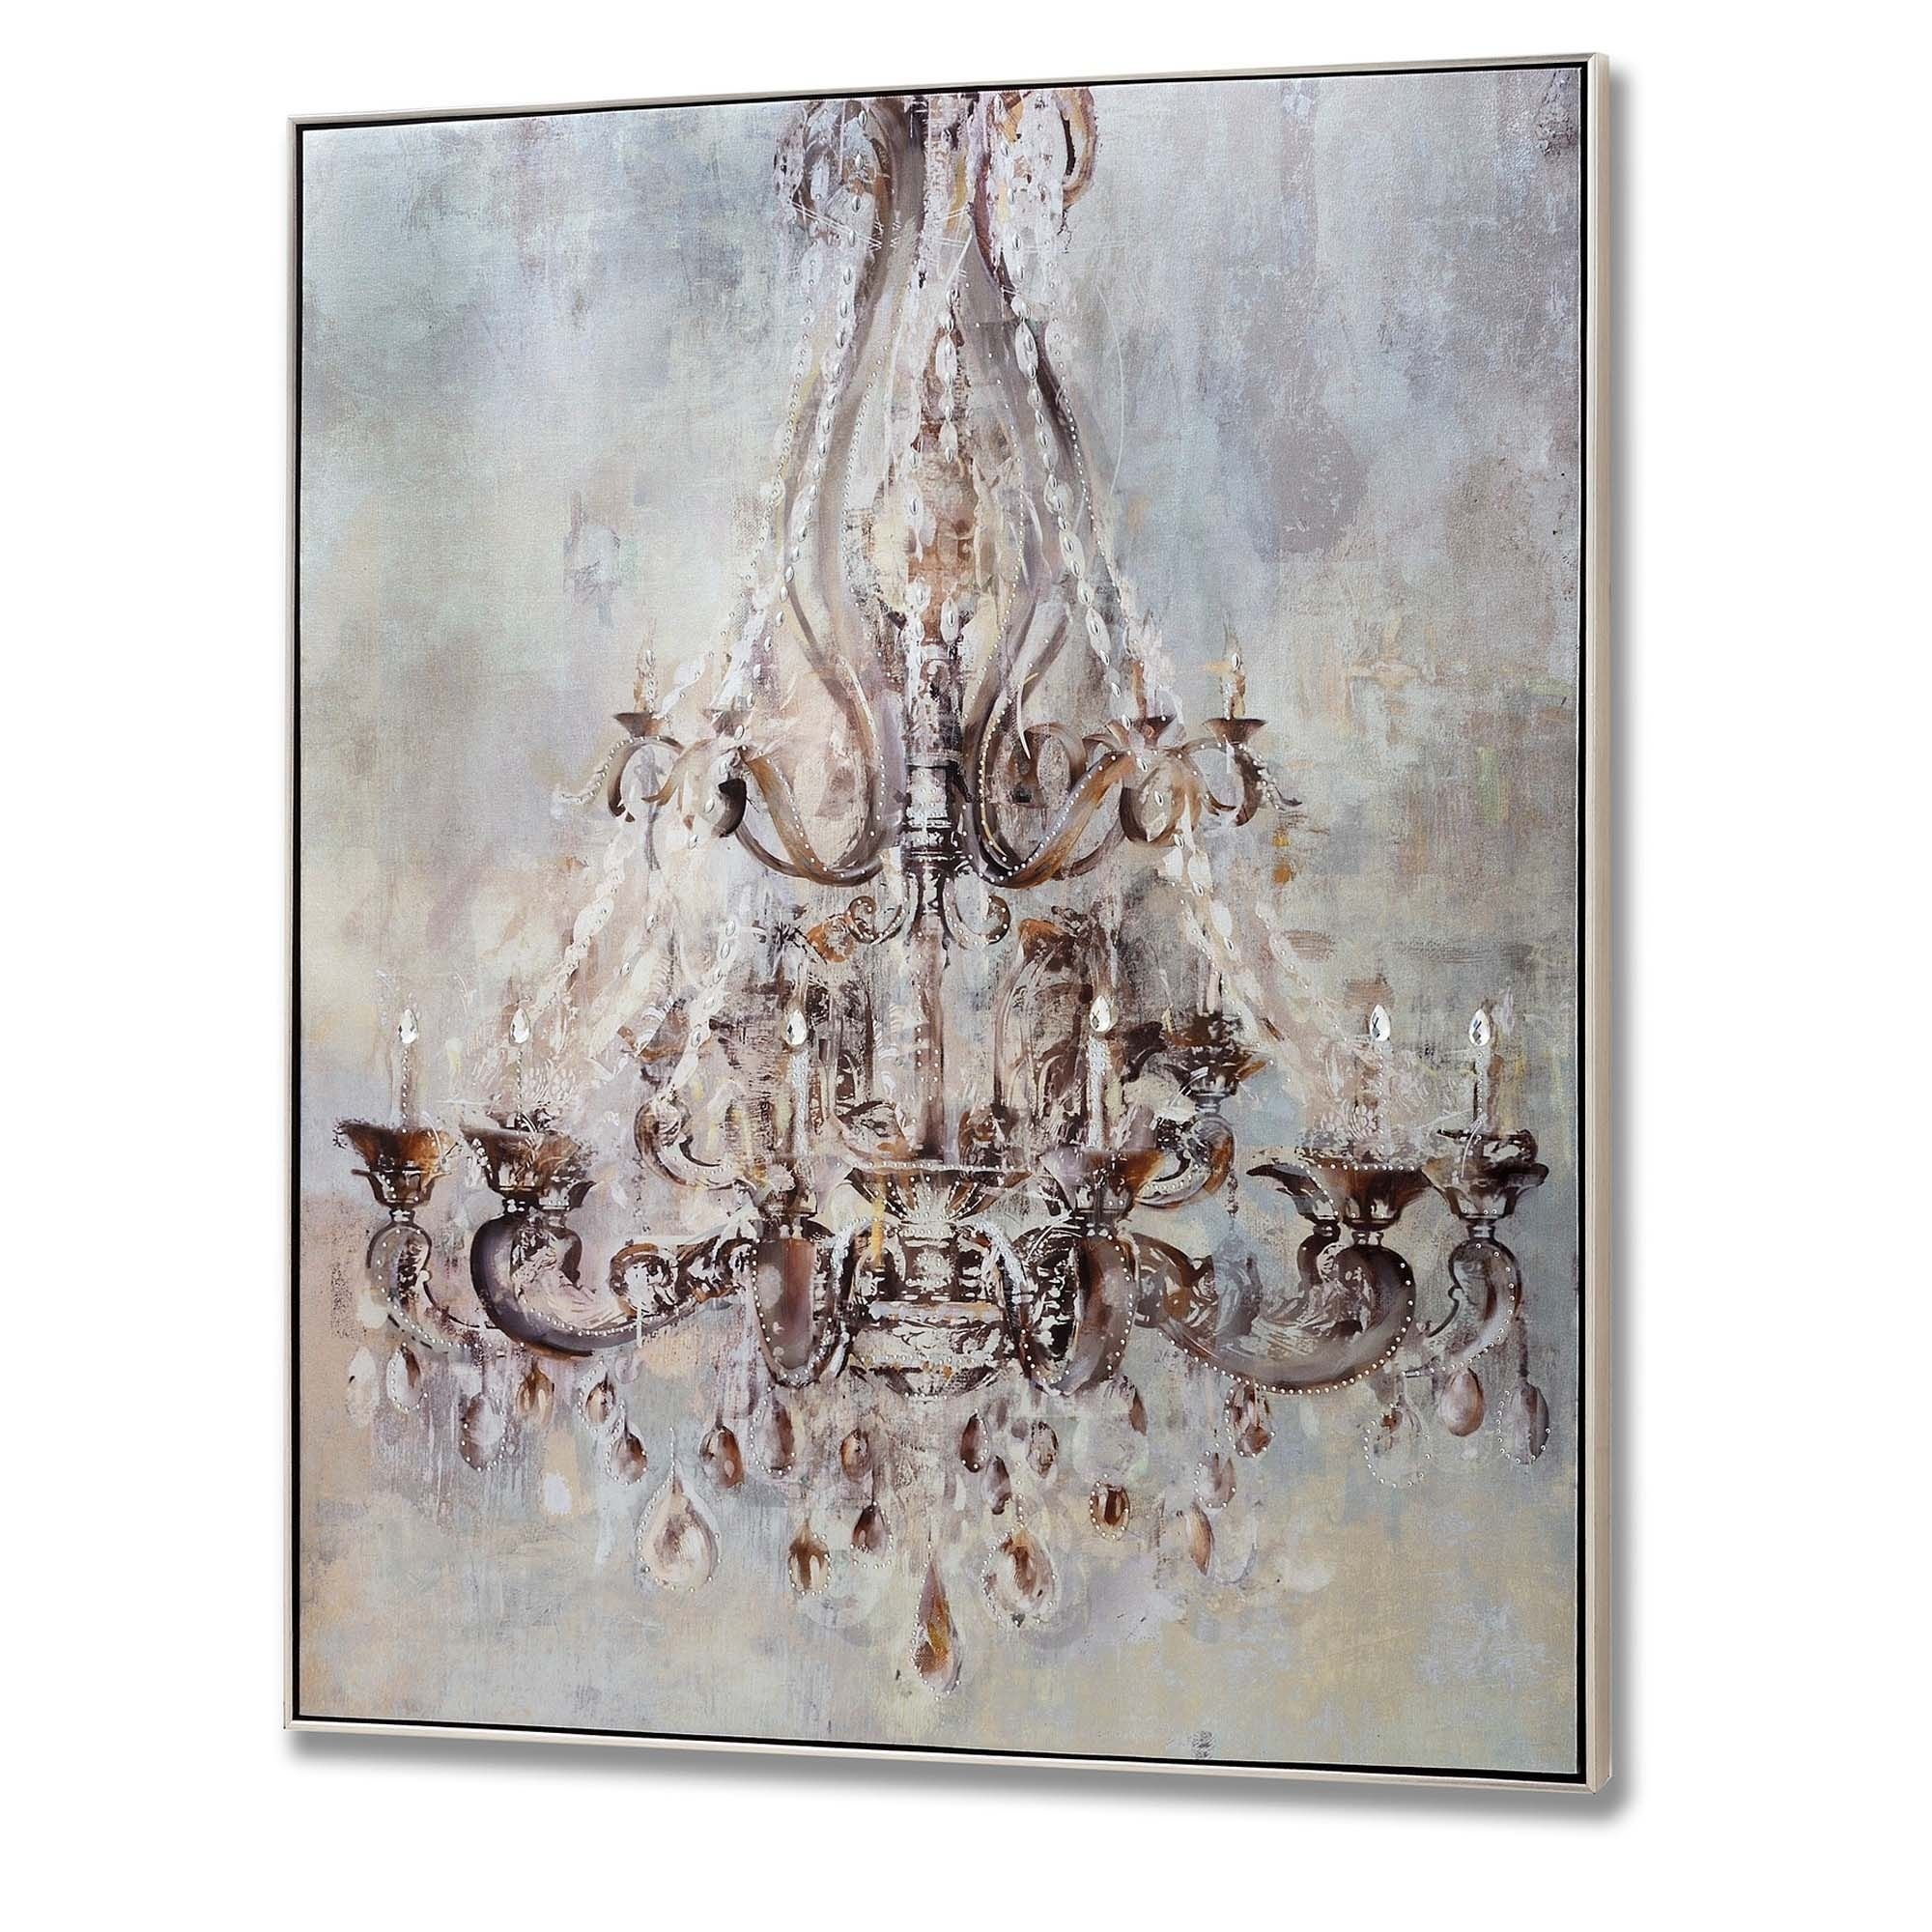 Metallic Chandelier Wall Art | Painting Art | Homesdirect365 Within Chandelier Wall Art (View 1 of 20)